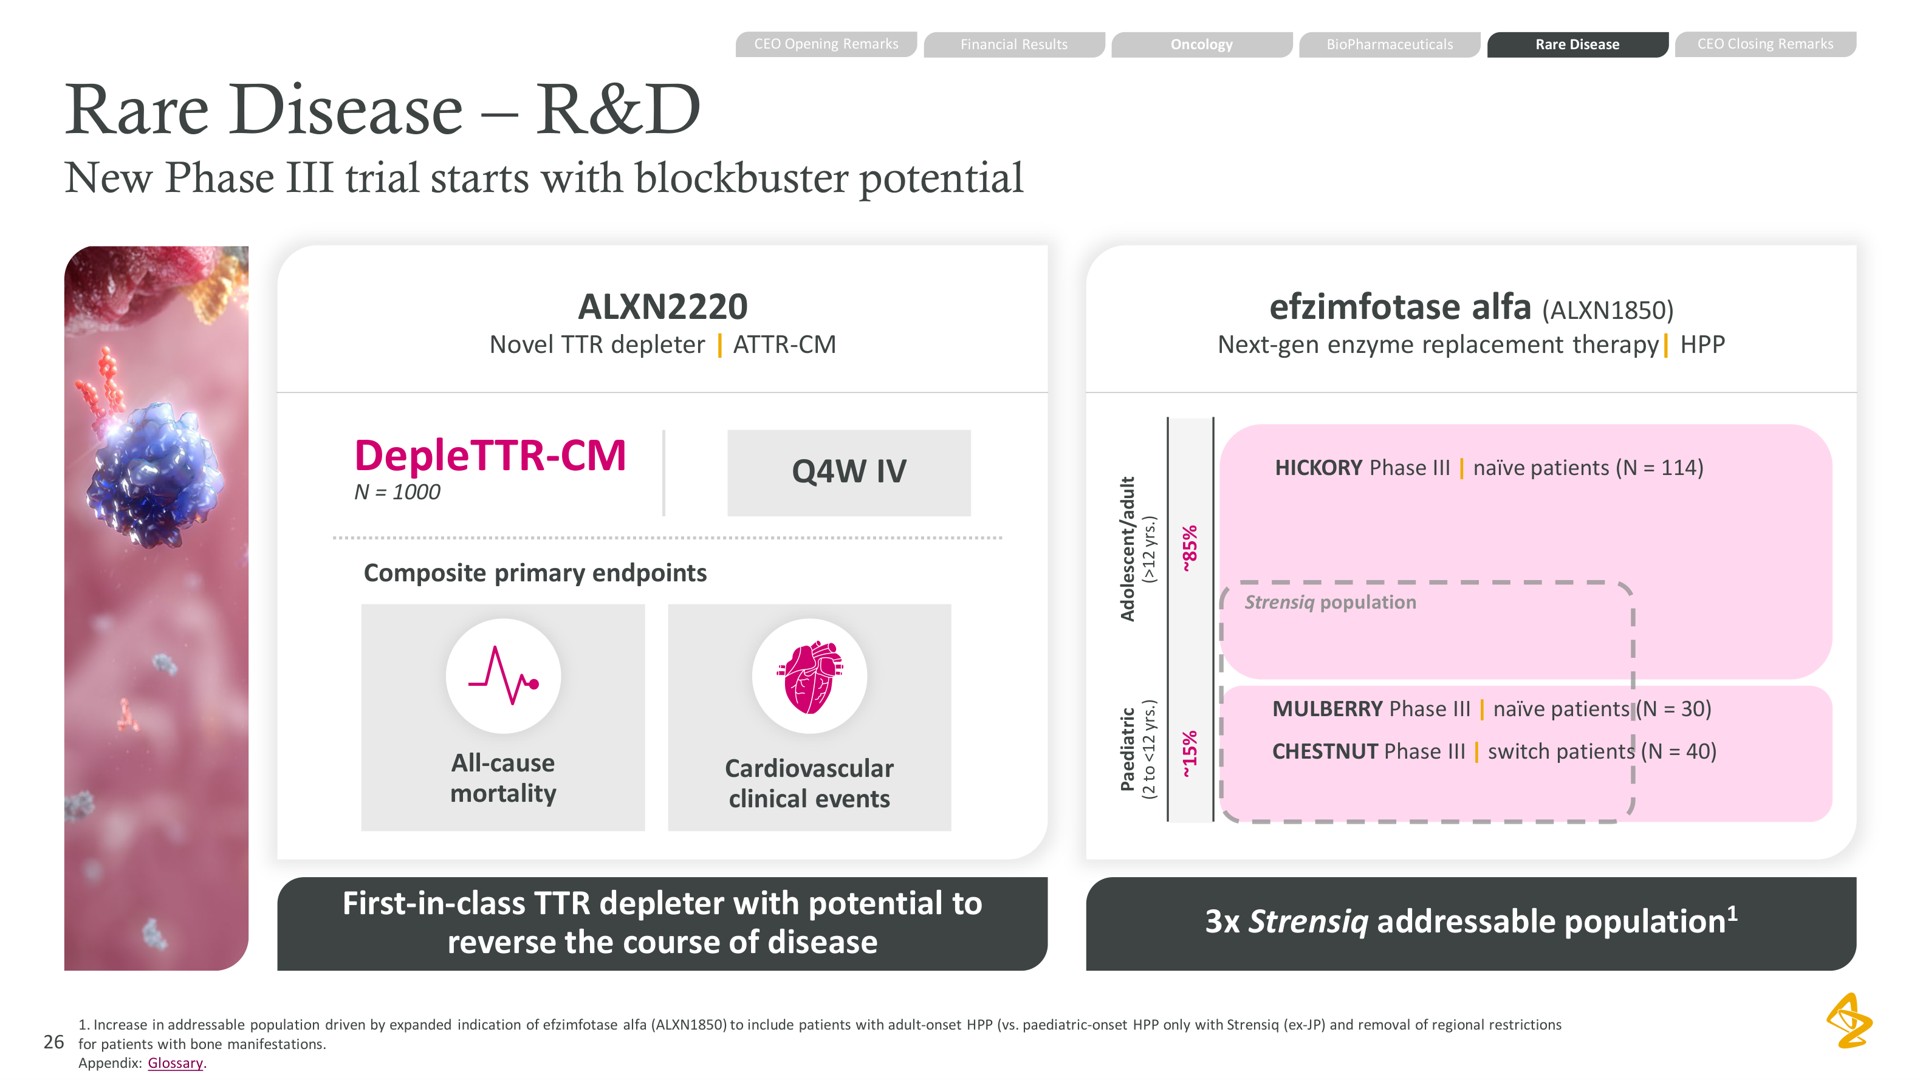 rare disease new phase trial starts with blockbuster potential alfa first in class with potential to reverse the course of disease population | AstraZeneca